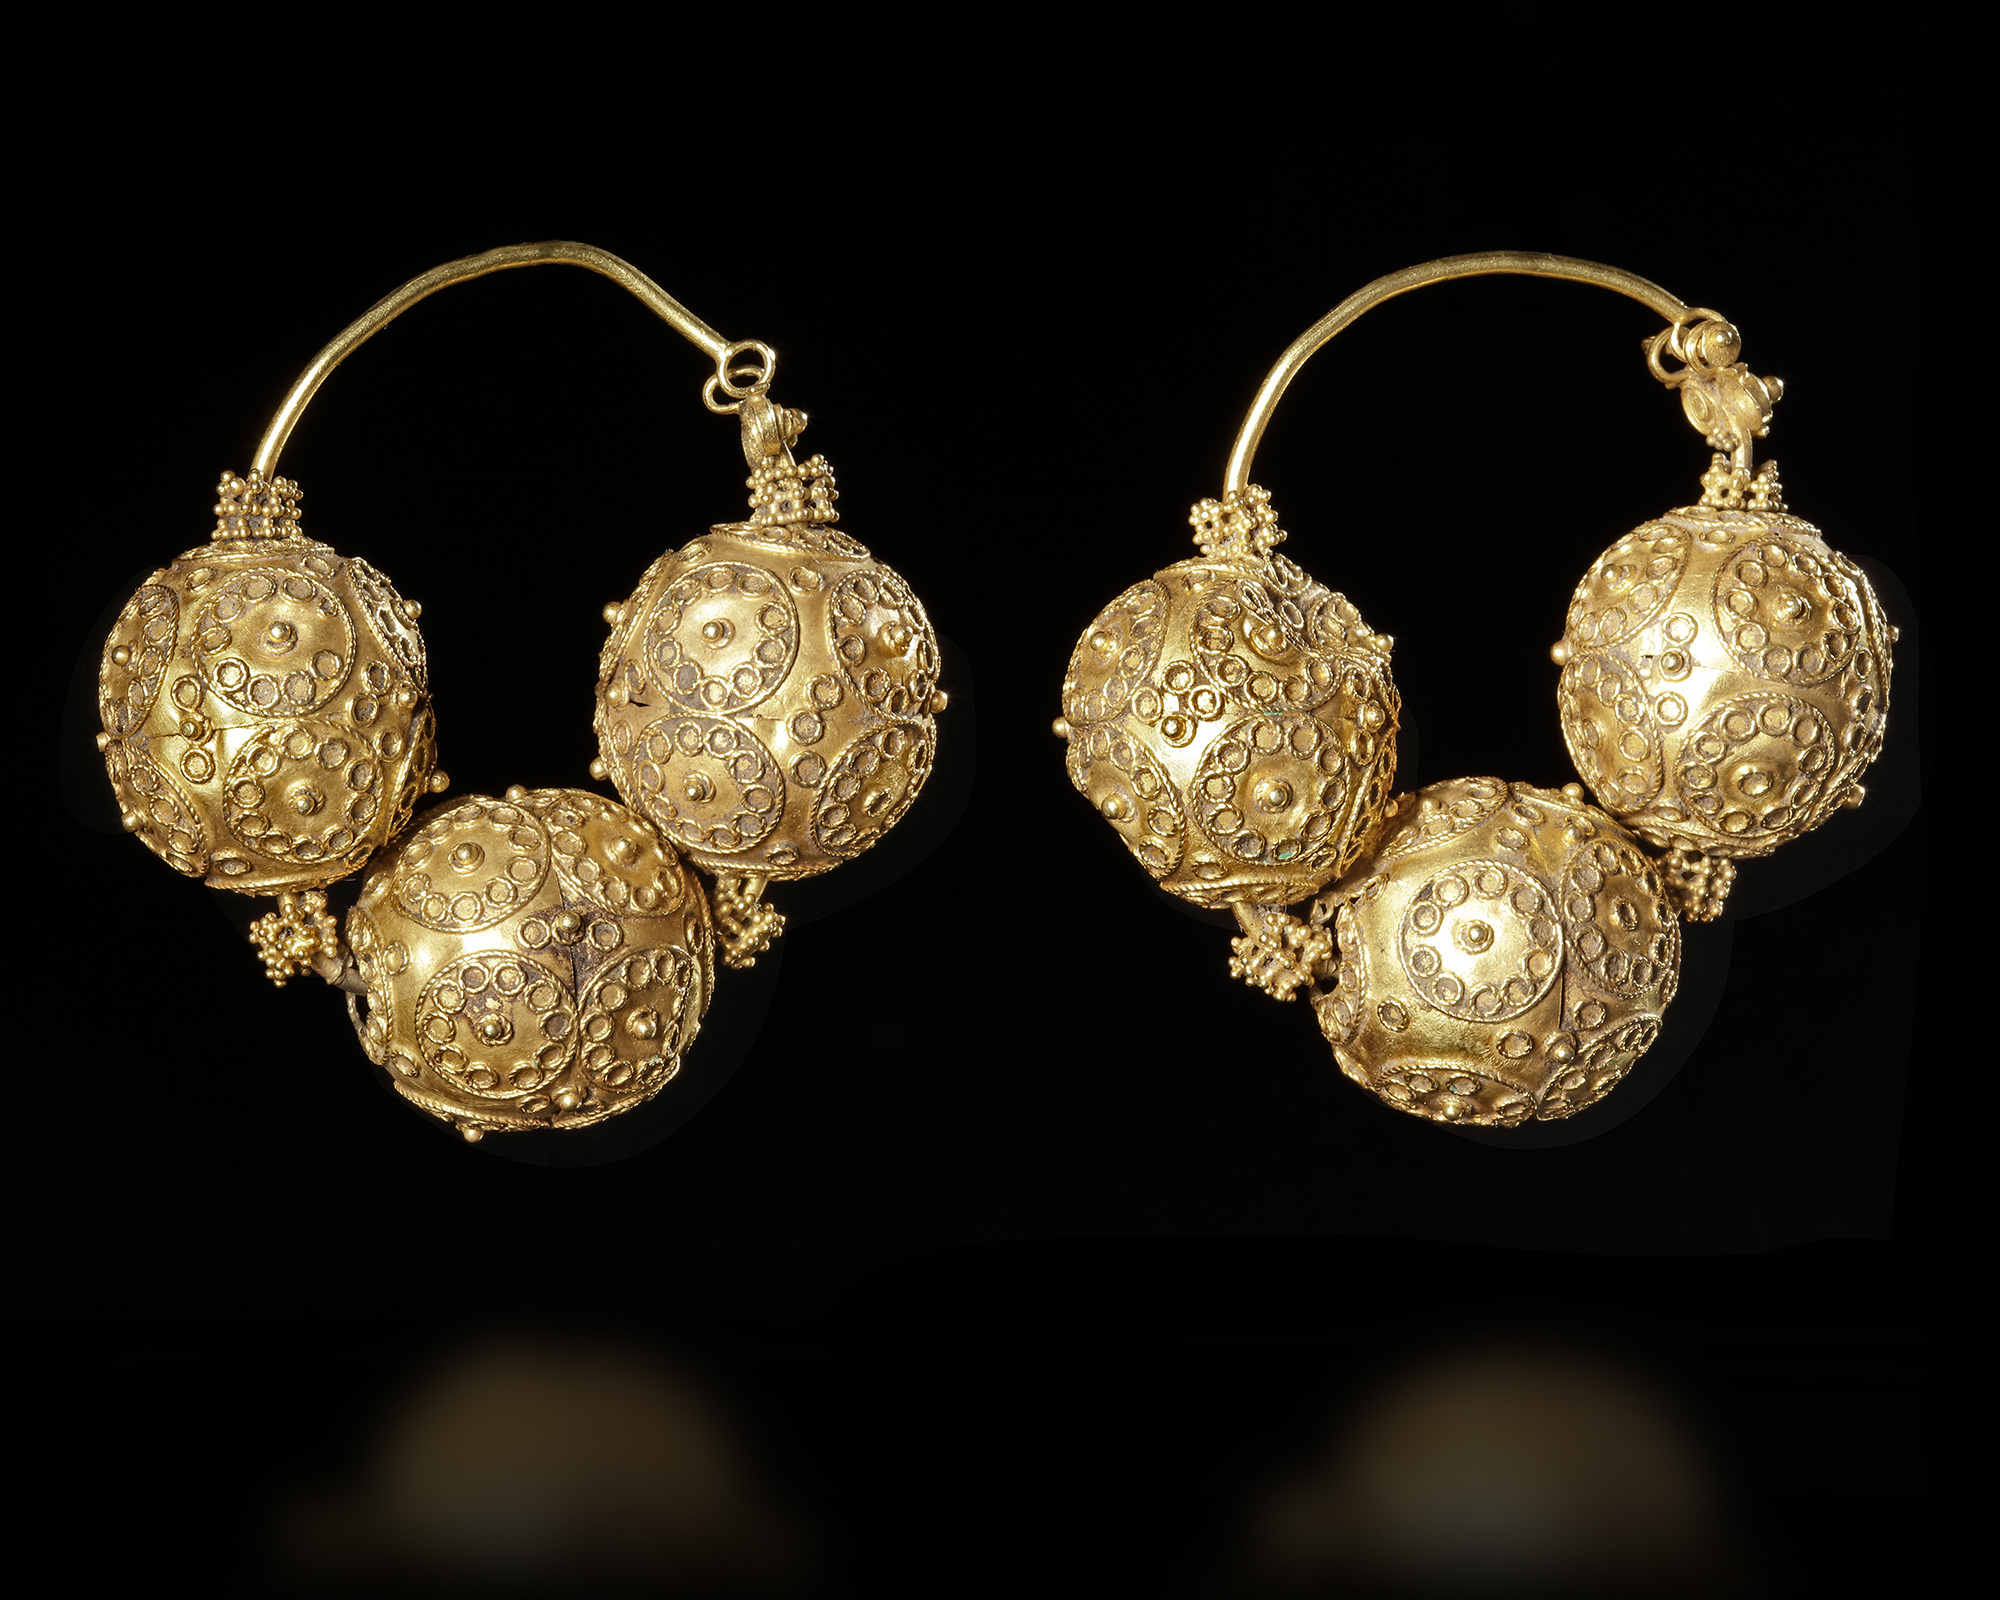 A PAIR OF EARLY ISLAMIC GOLD EARRINGS, 12TH CENTURY - Image 4 of 6